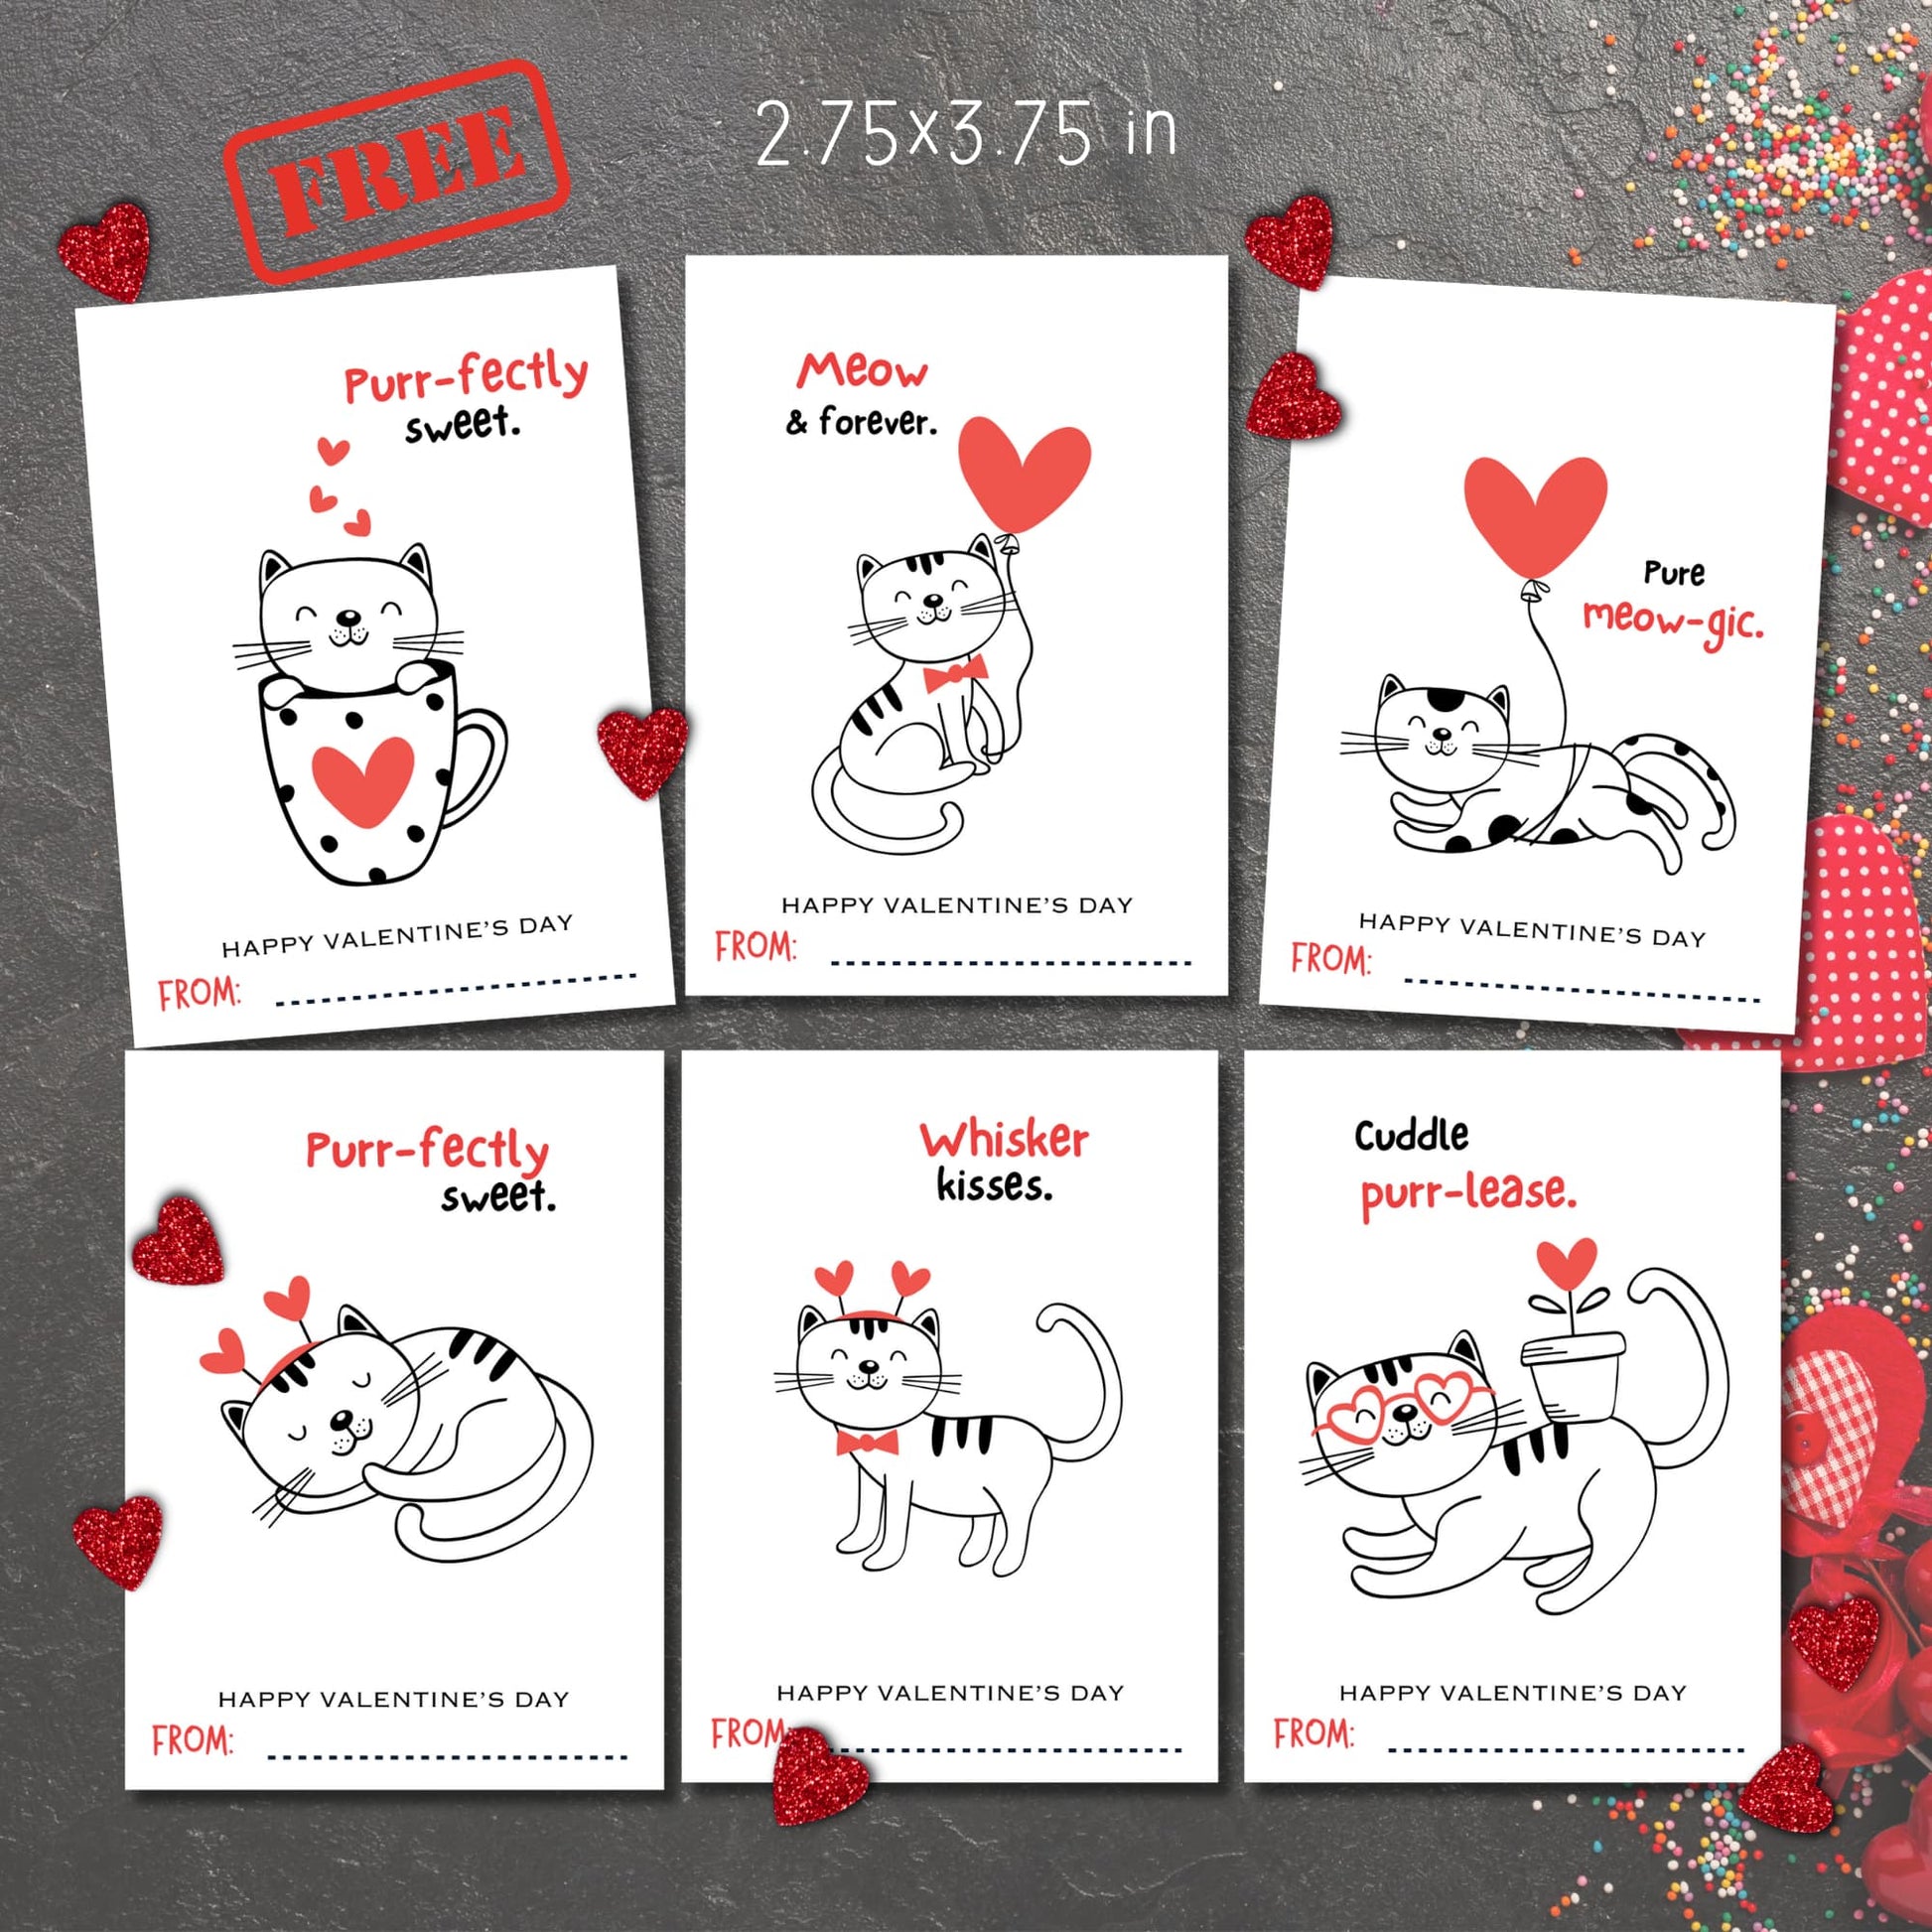 Six adorable dog-themed Valentine's Day cards sized 2.75x3.75 inches each, ready for kids to share love and joy.